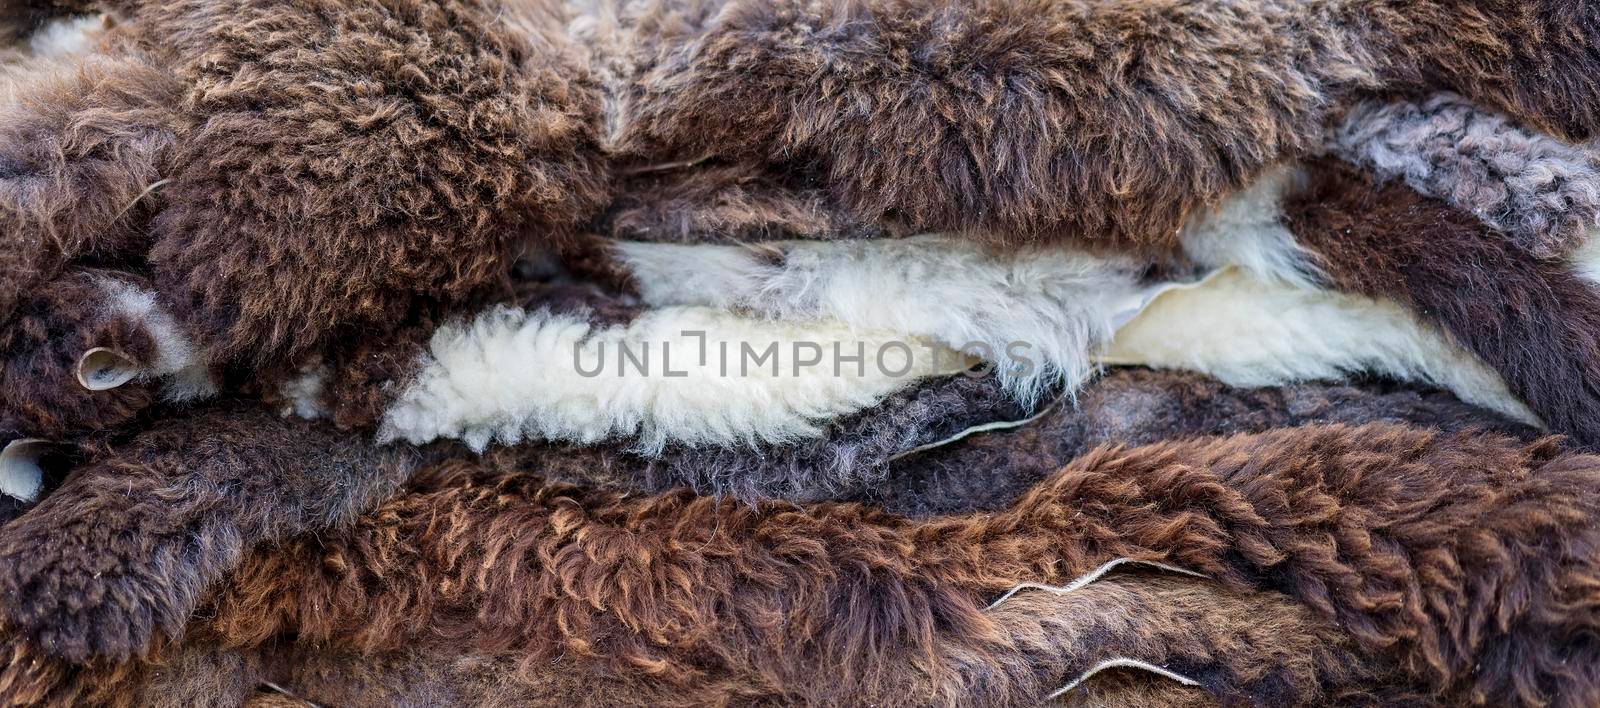 Layers of animal pelts in various shades from white to brown